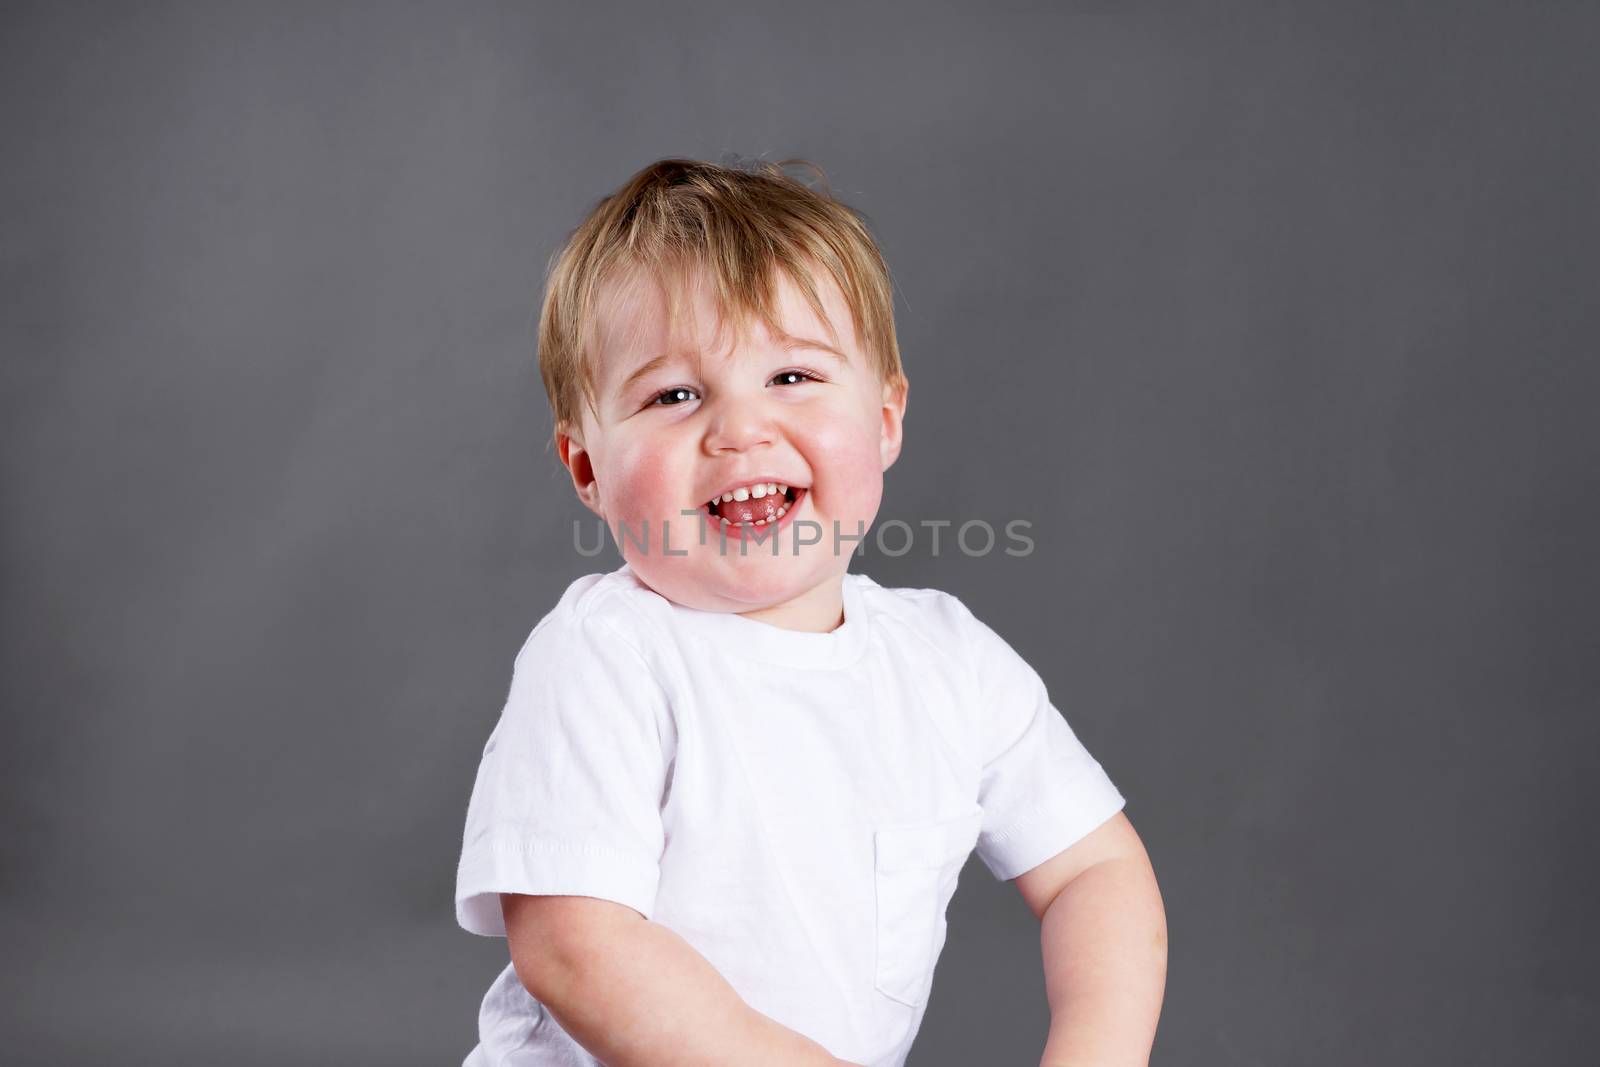 Cute little blond boy or toddler laughing, studio over grey